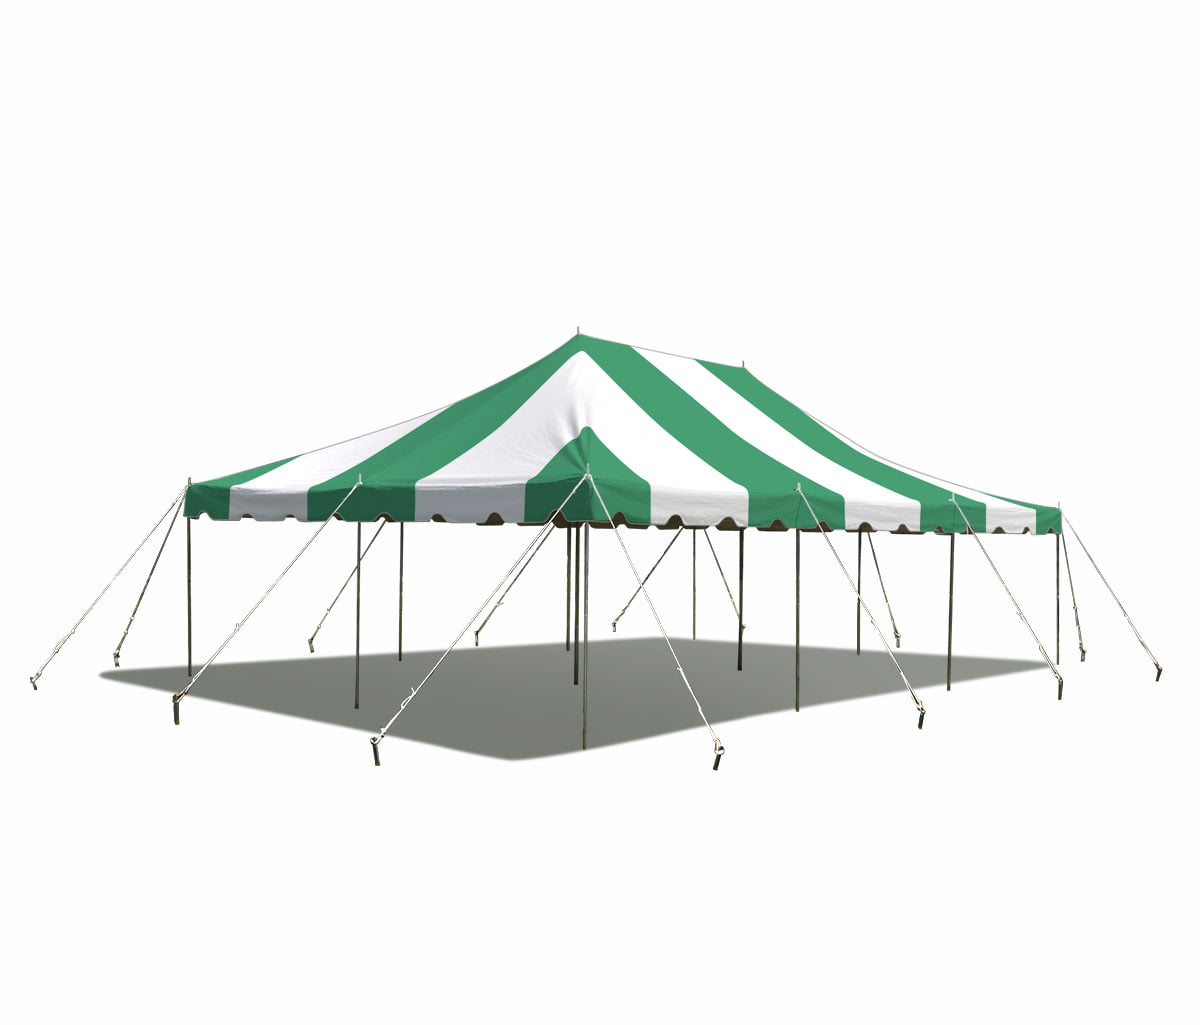 Party Tents Direct Weekender Outdoor Canopy Pole Tent, Green, 20 ft x 30 ft